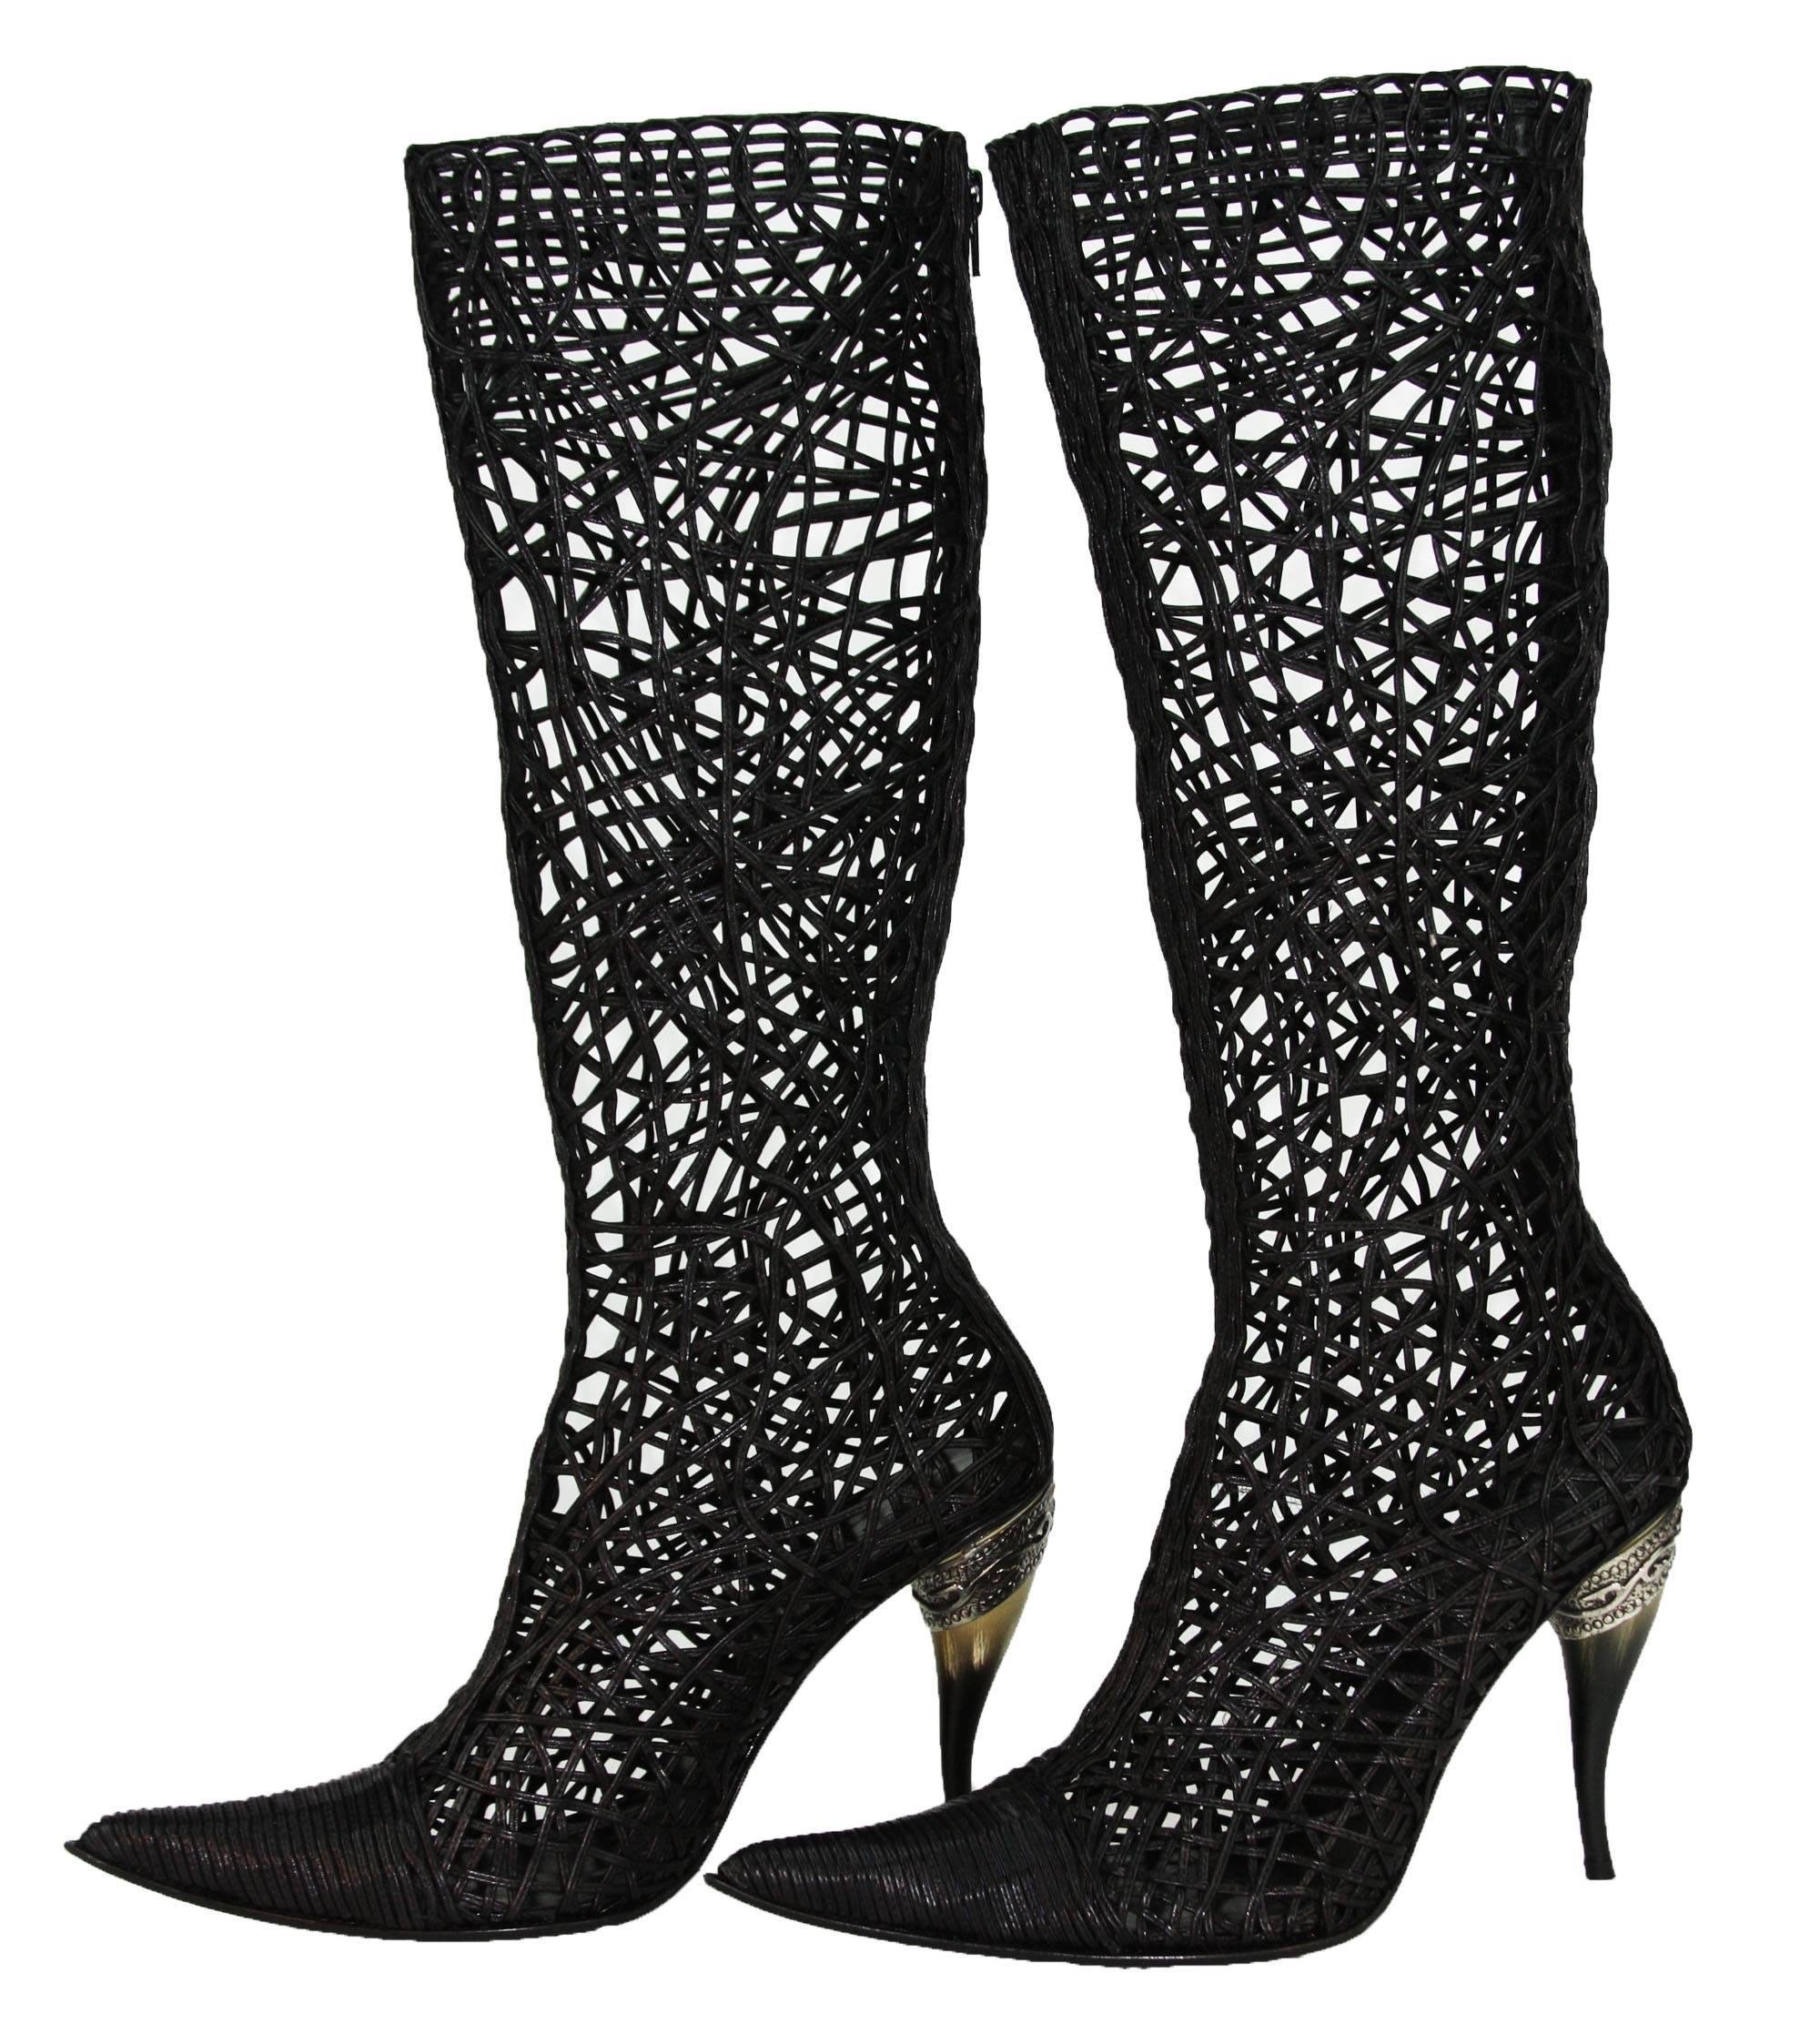 New GIANNI BARBATO Leather Braided Cage Boots
Designer Size - 39
100% Braided Leather
Color – Black
Horn-Like Heel with Silver Frame, Back Side Zip Closure, Leather Sole and Insole, Pointed Toe
Heel Height – 4 inches.
Made in Italy.
Retail